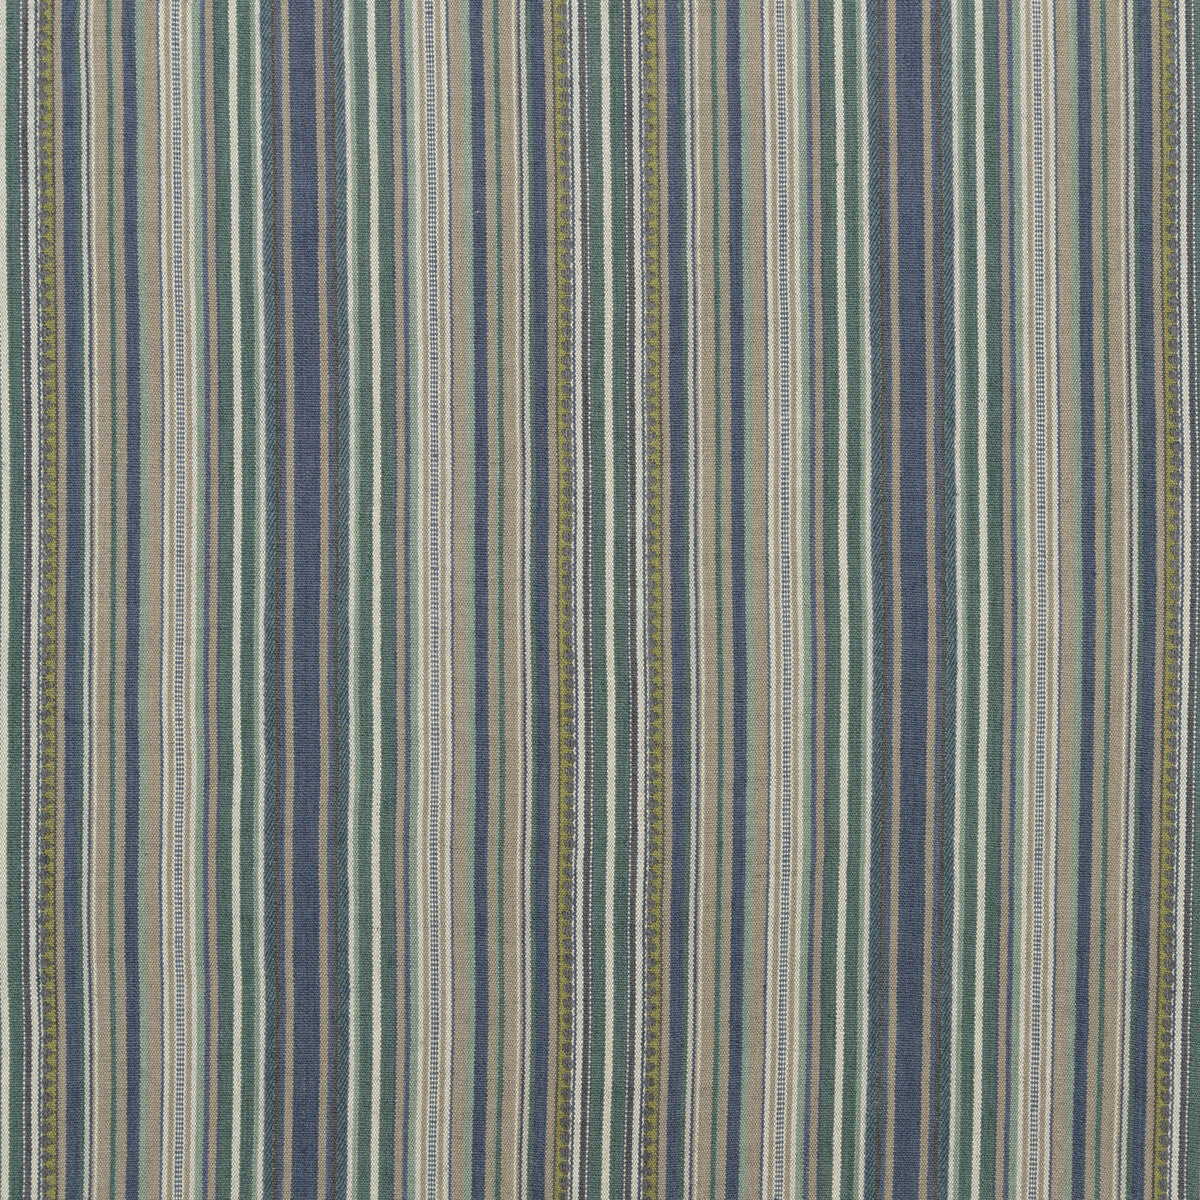 Tapton Stripe fabric in teal/indigo color - pattern FD735.R46.0 - by Mulberry in the Festival collection